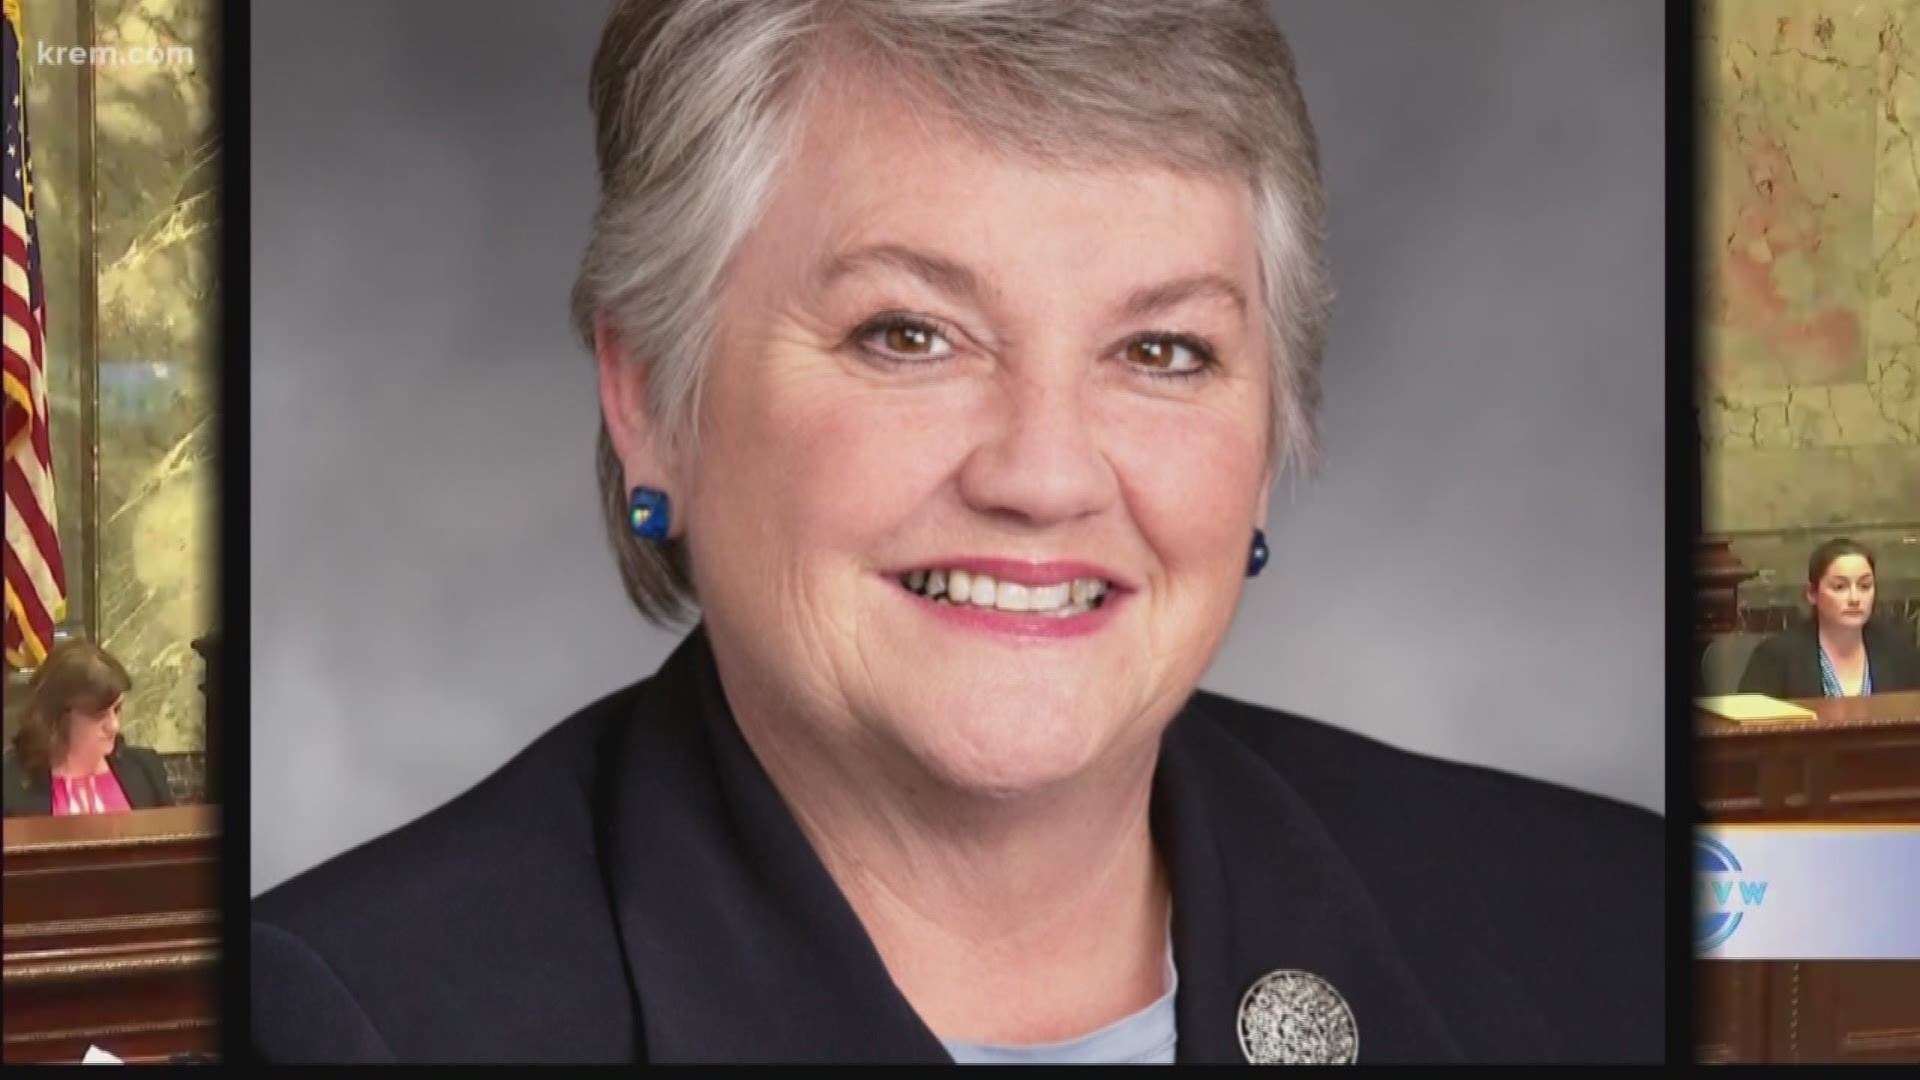 KREM Reporter Taylor Viydo takes a look at the political career of Washington Sen. Maureen Walsh, who has come under fire for comments about nurses.